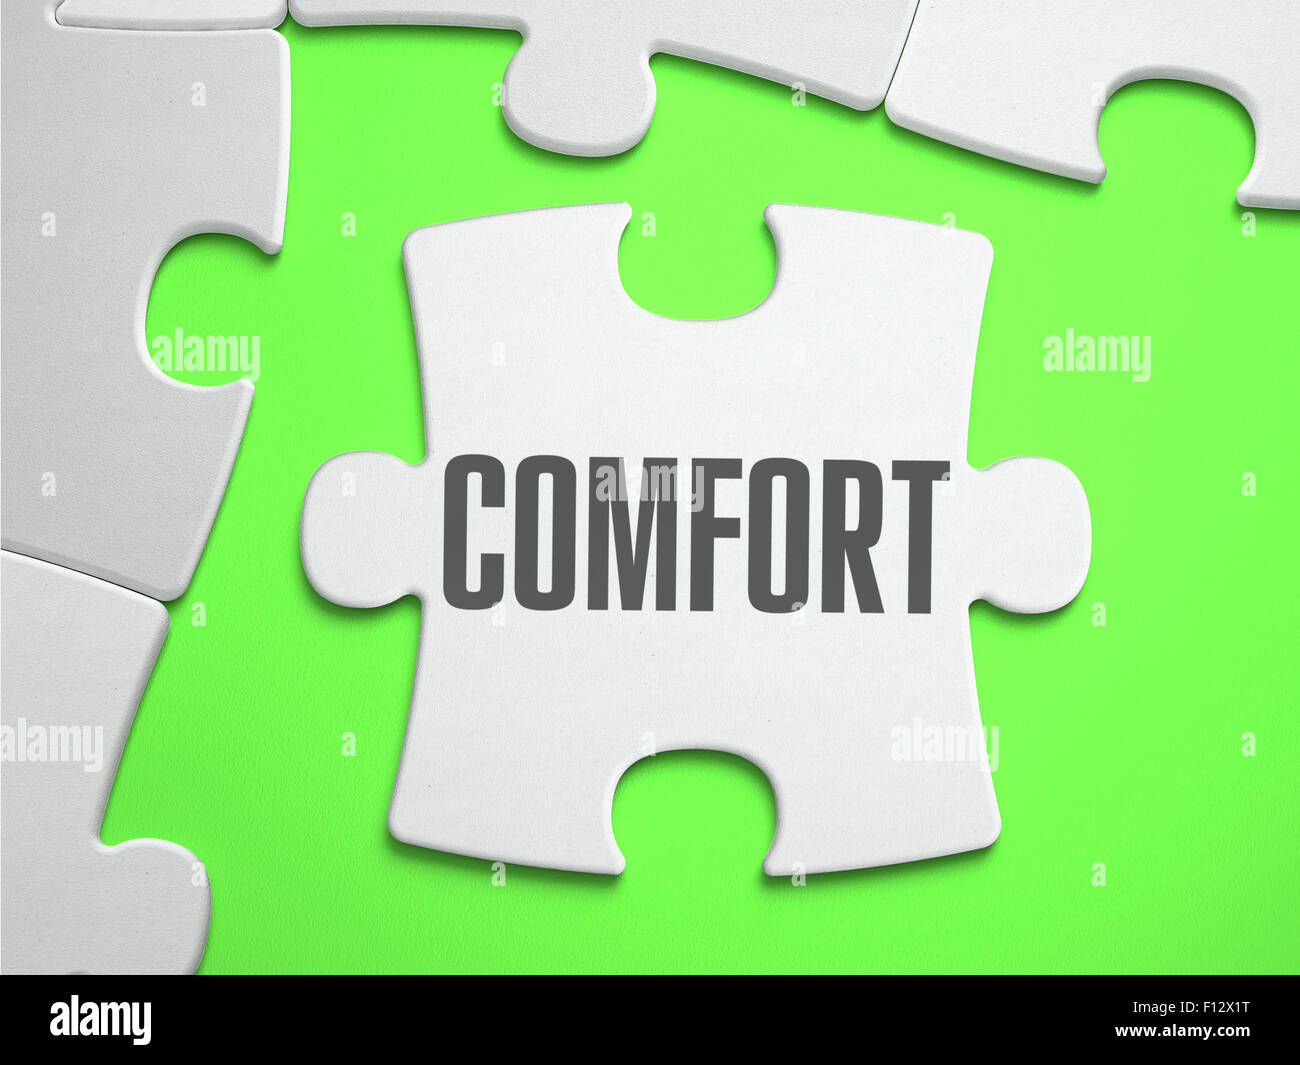 Comfort - Jigsaw Puzzle with Missing Pieces. Stock Photo